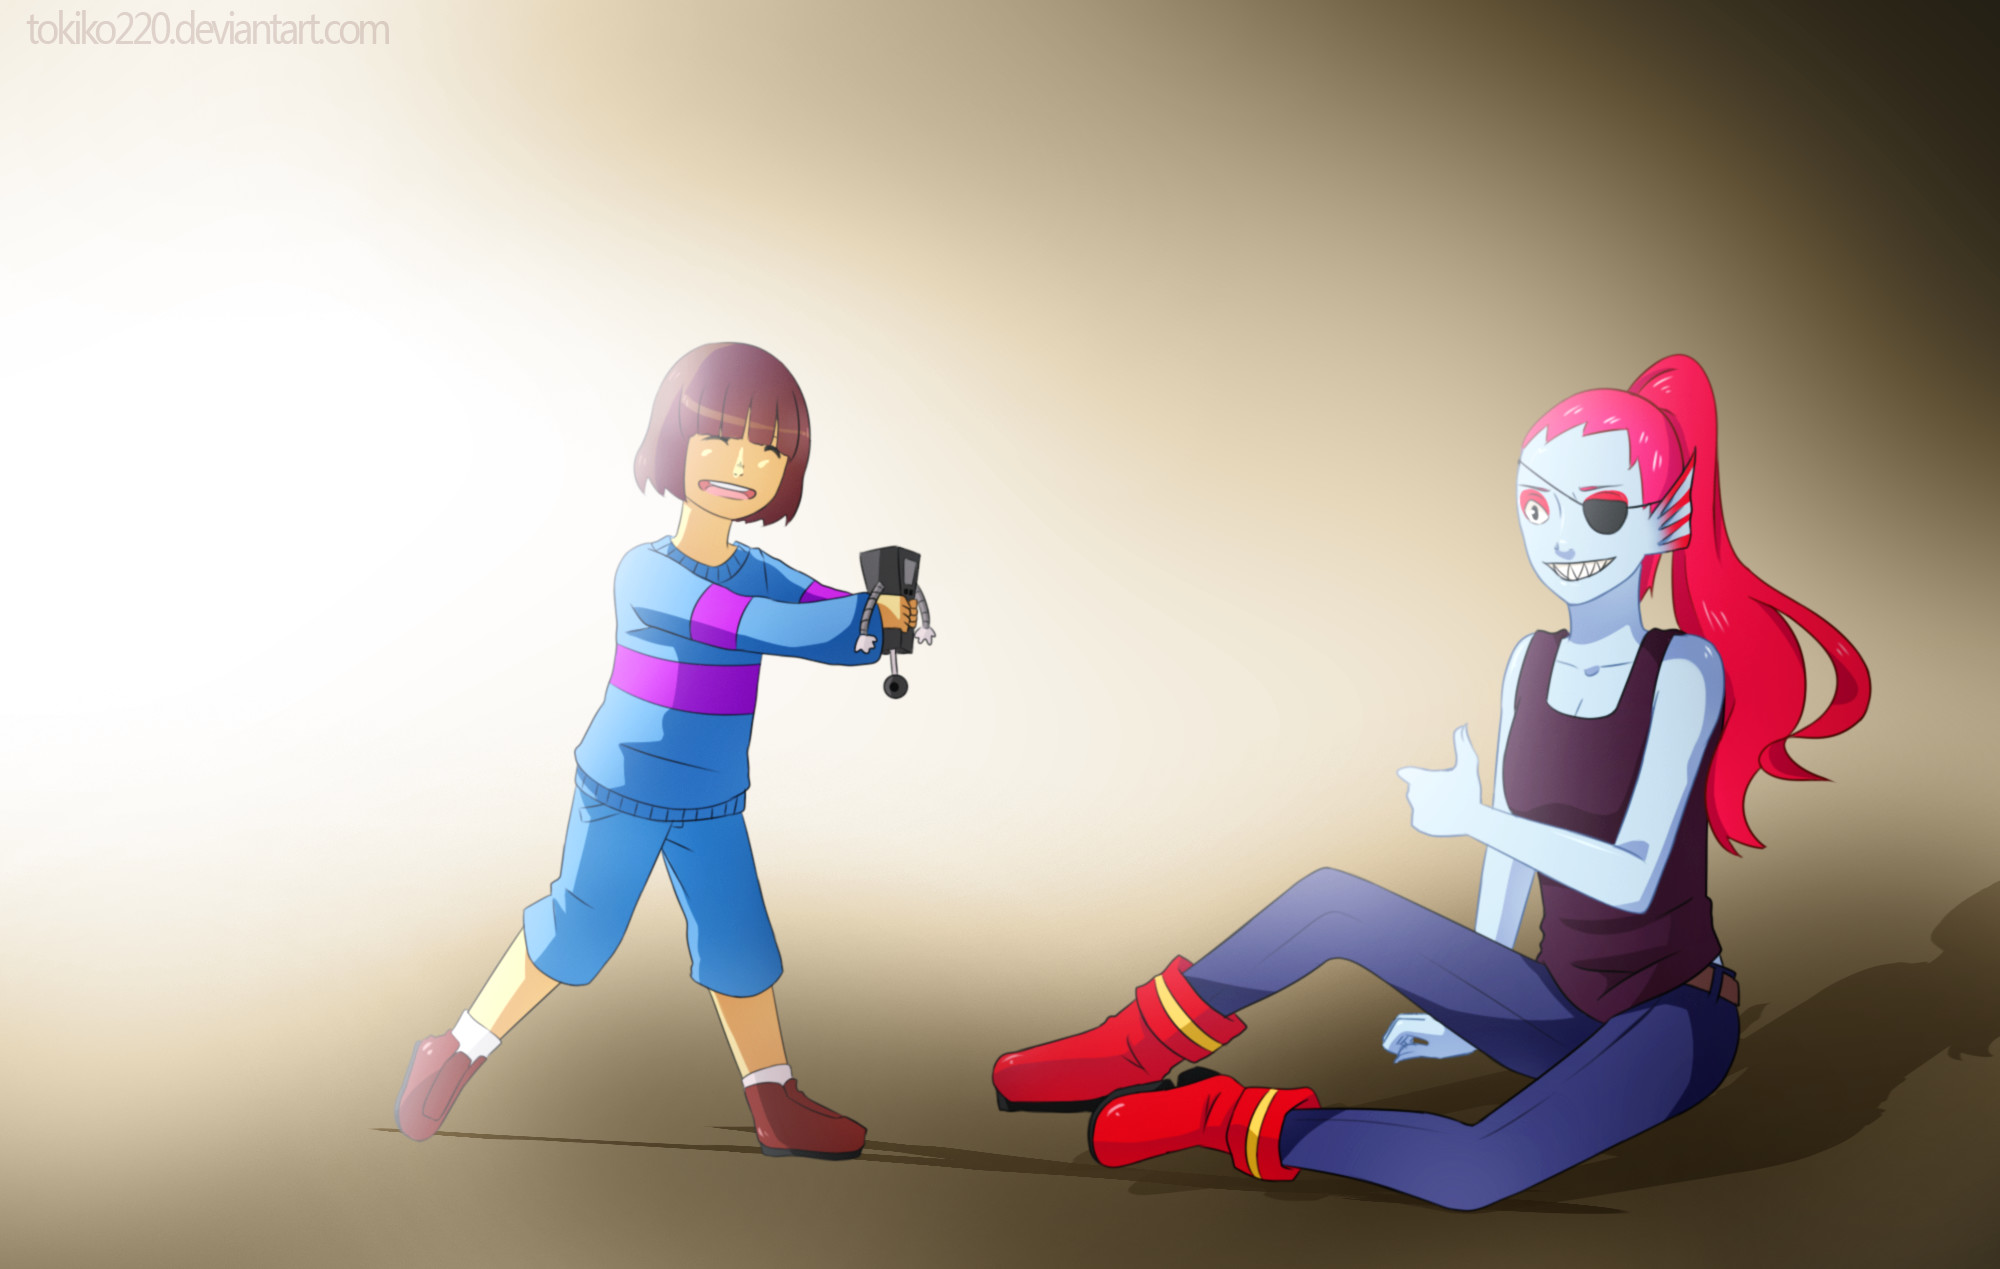 2000x1269 ... UNDERTALE: Frisk and Undyne by Tokiko220